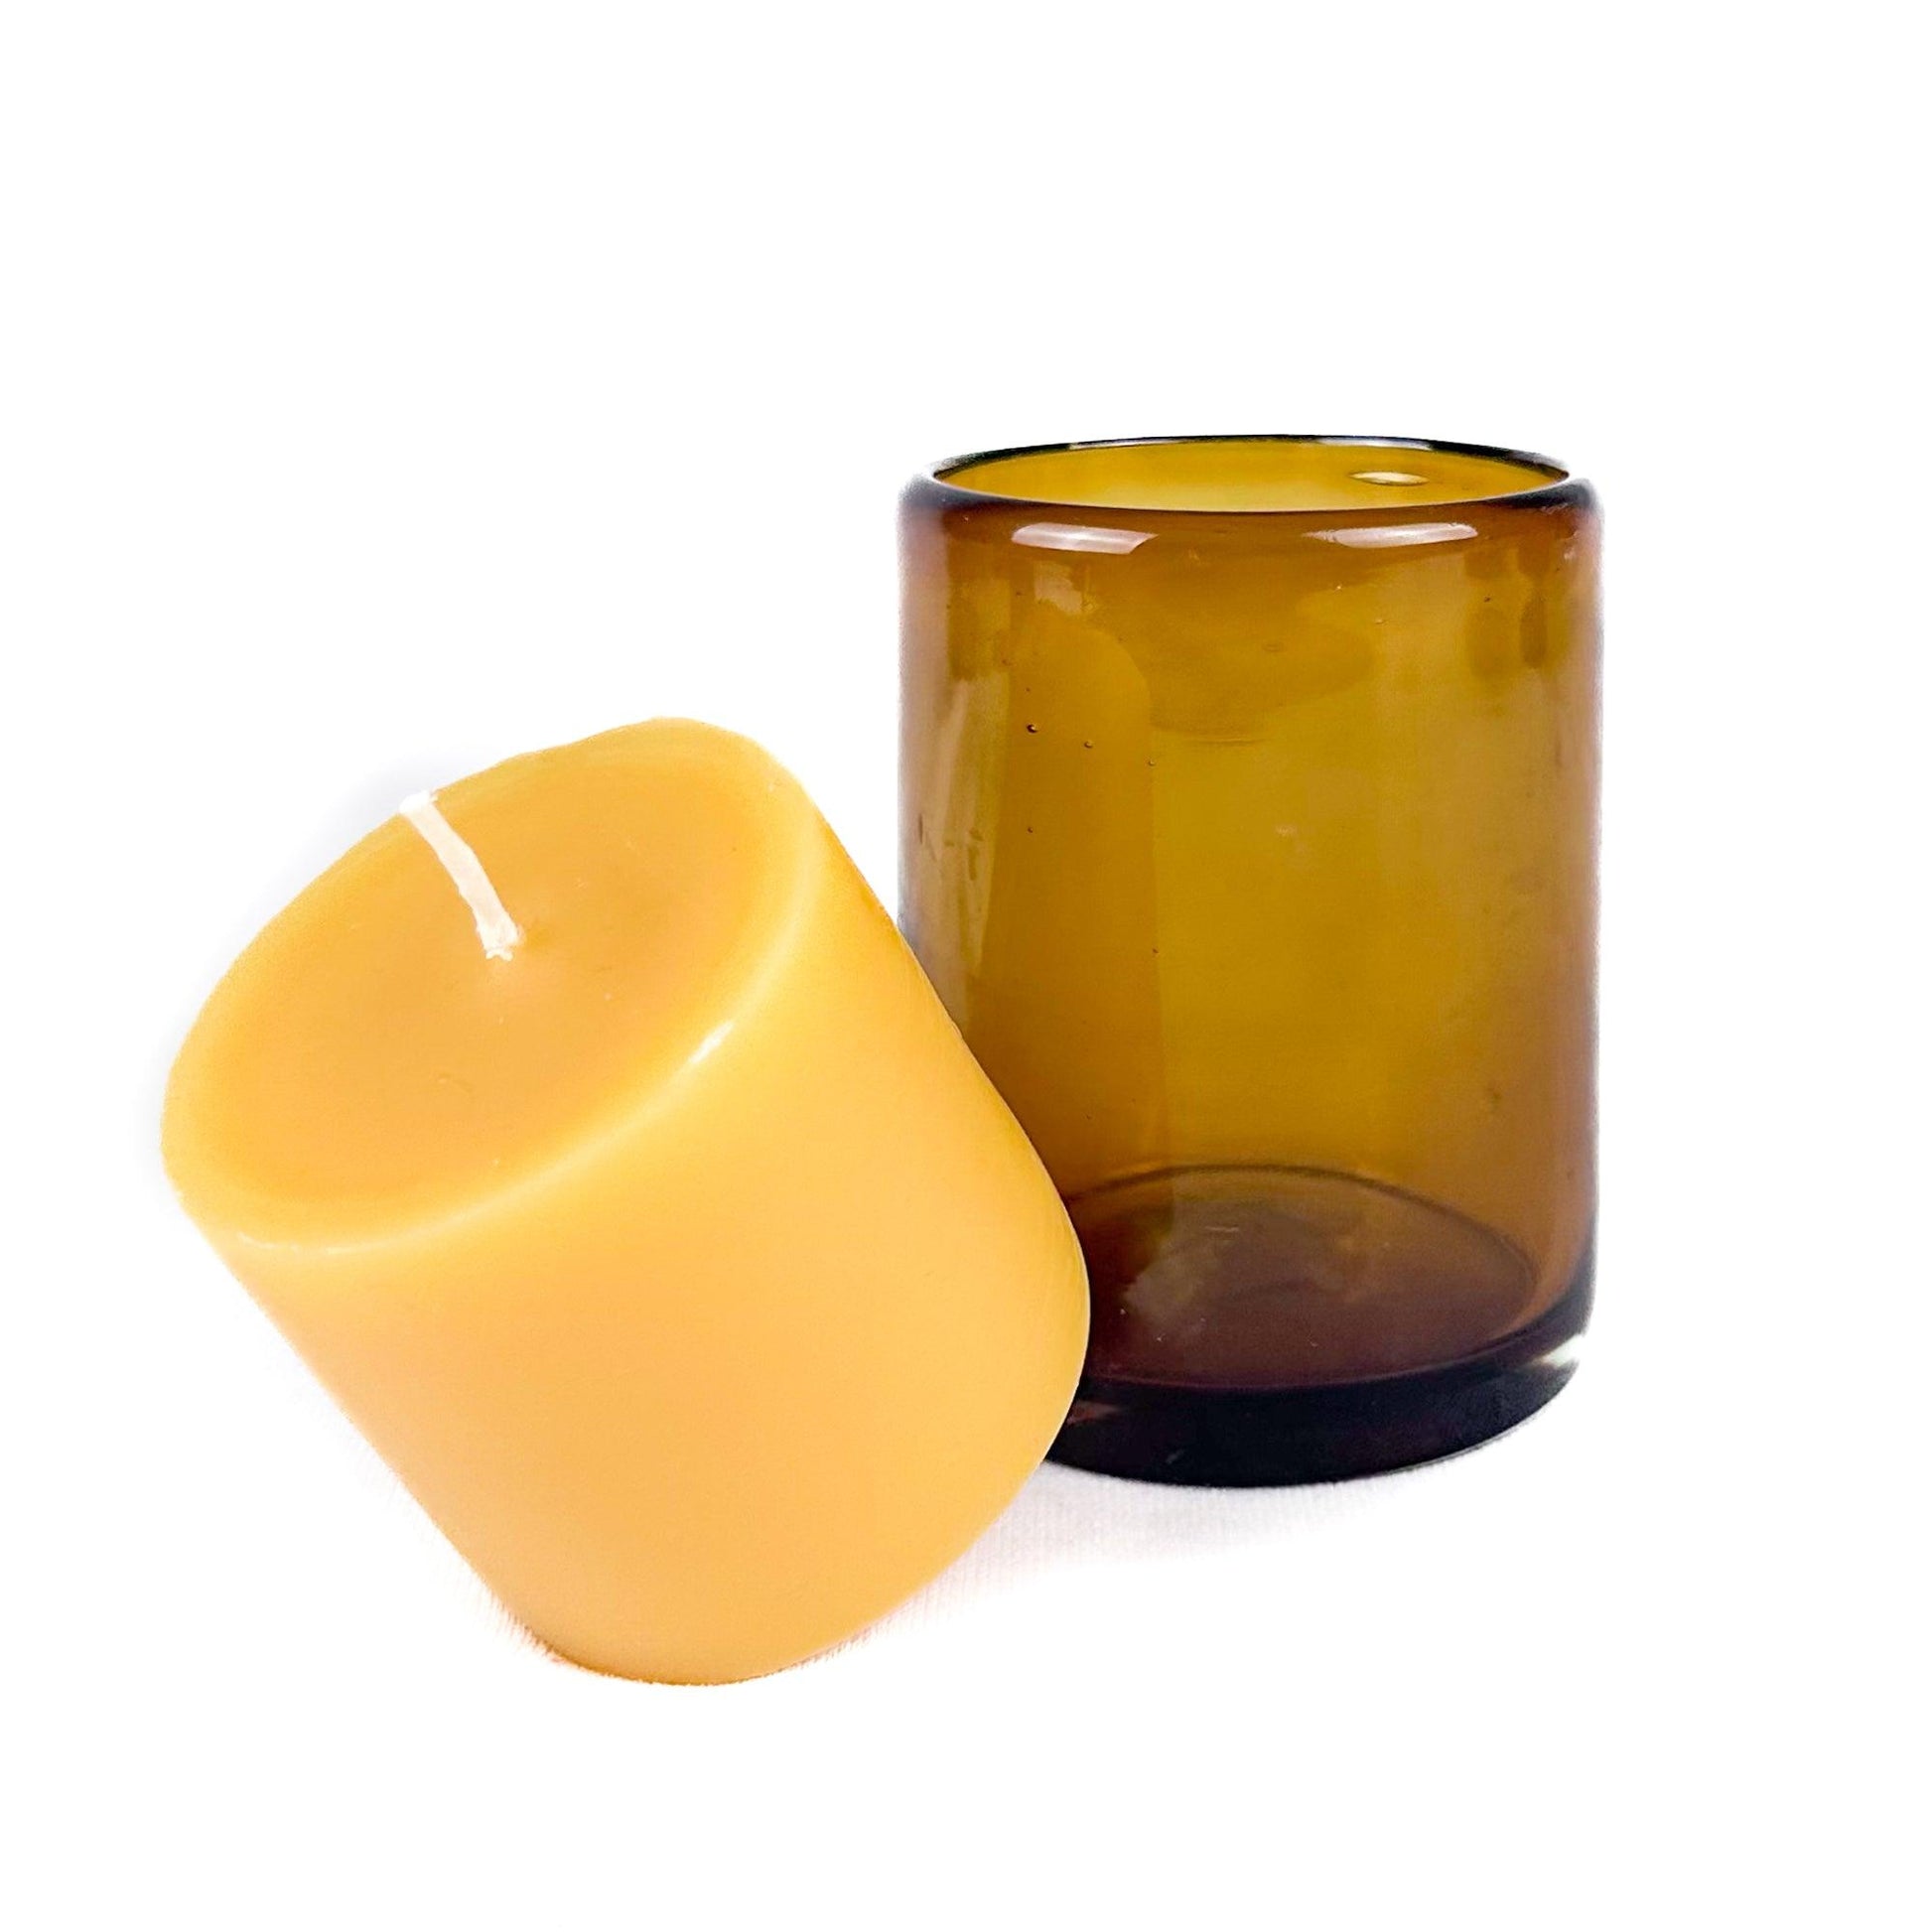 Bluecorn Beeswax Spanish 3-Wick Pure Beeswax Candle - 100% Recycled Glass